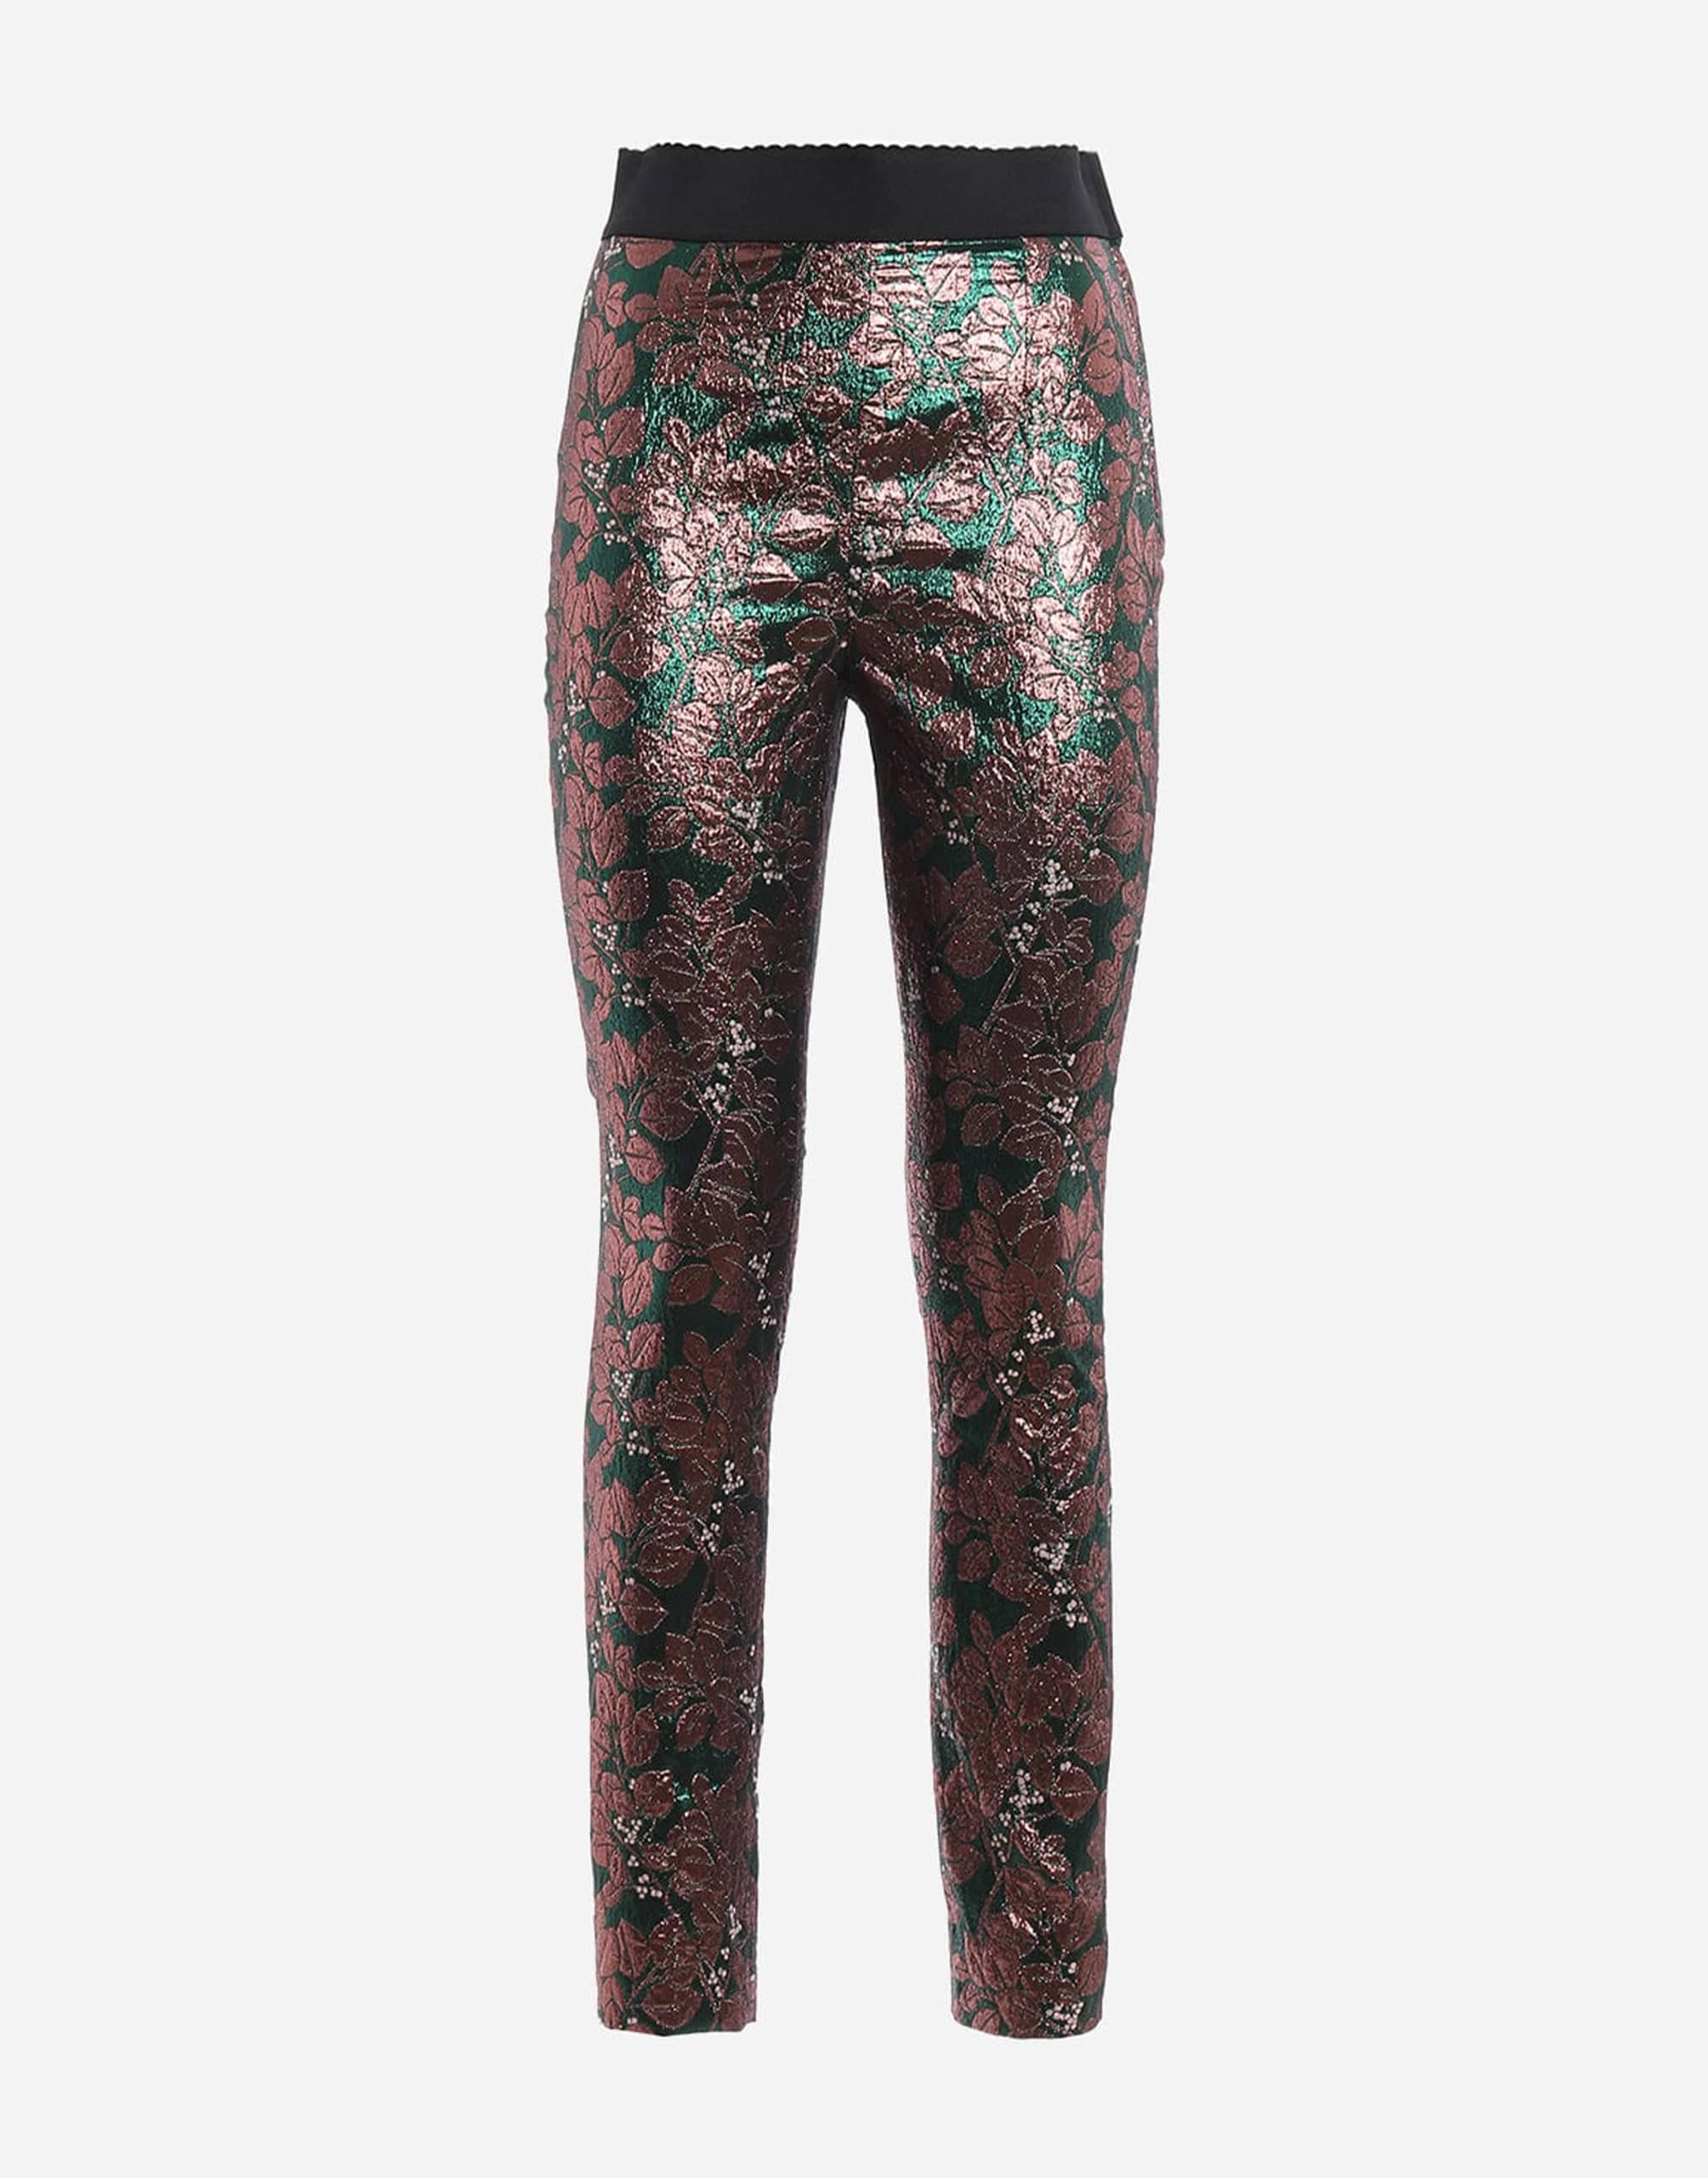 Buy CLOTH HAUS Printed Brocade Relaxed Fit Women's Pants | Shoppers Stop